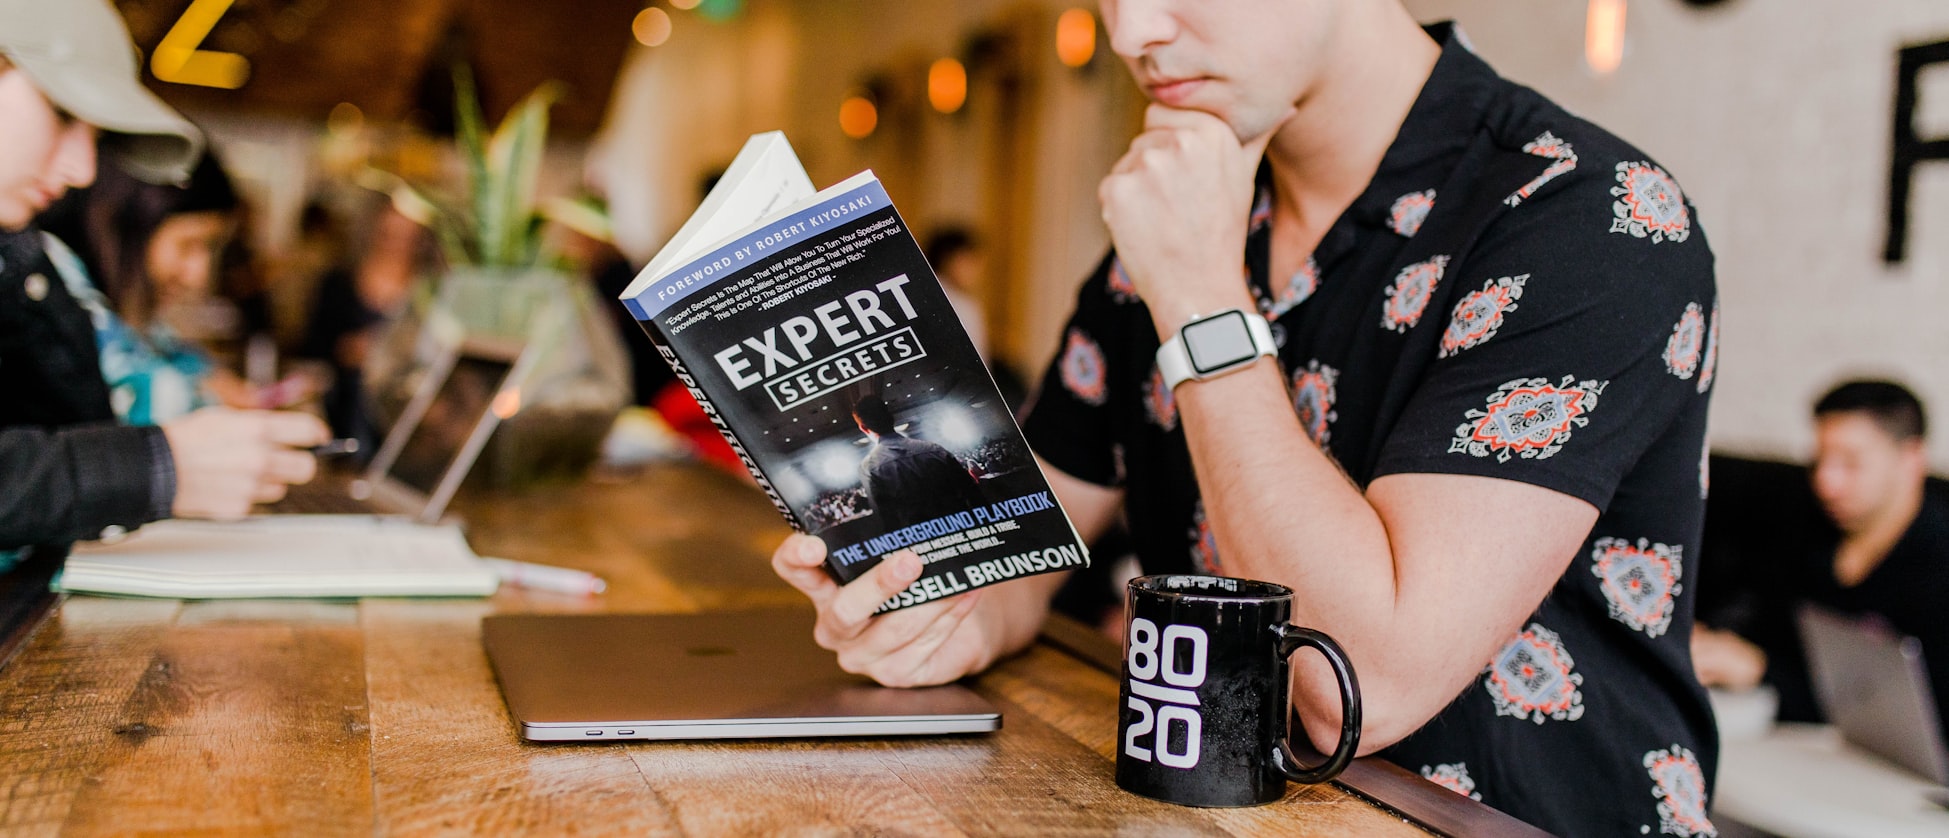 Man sits in a coffee shop reading Expert Secrets book by Clickfunnels co-creator Russell Brunson